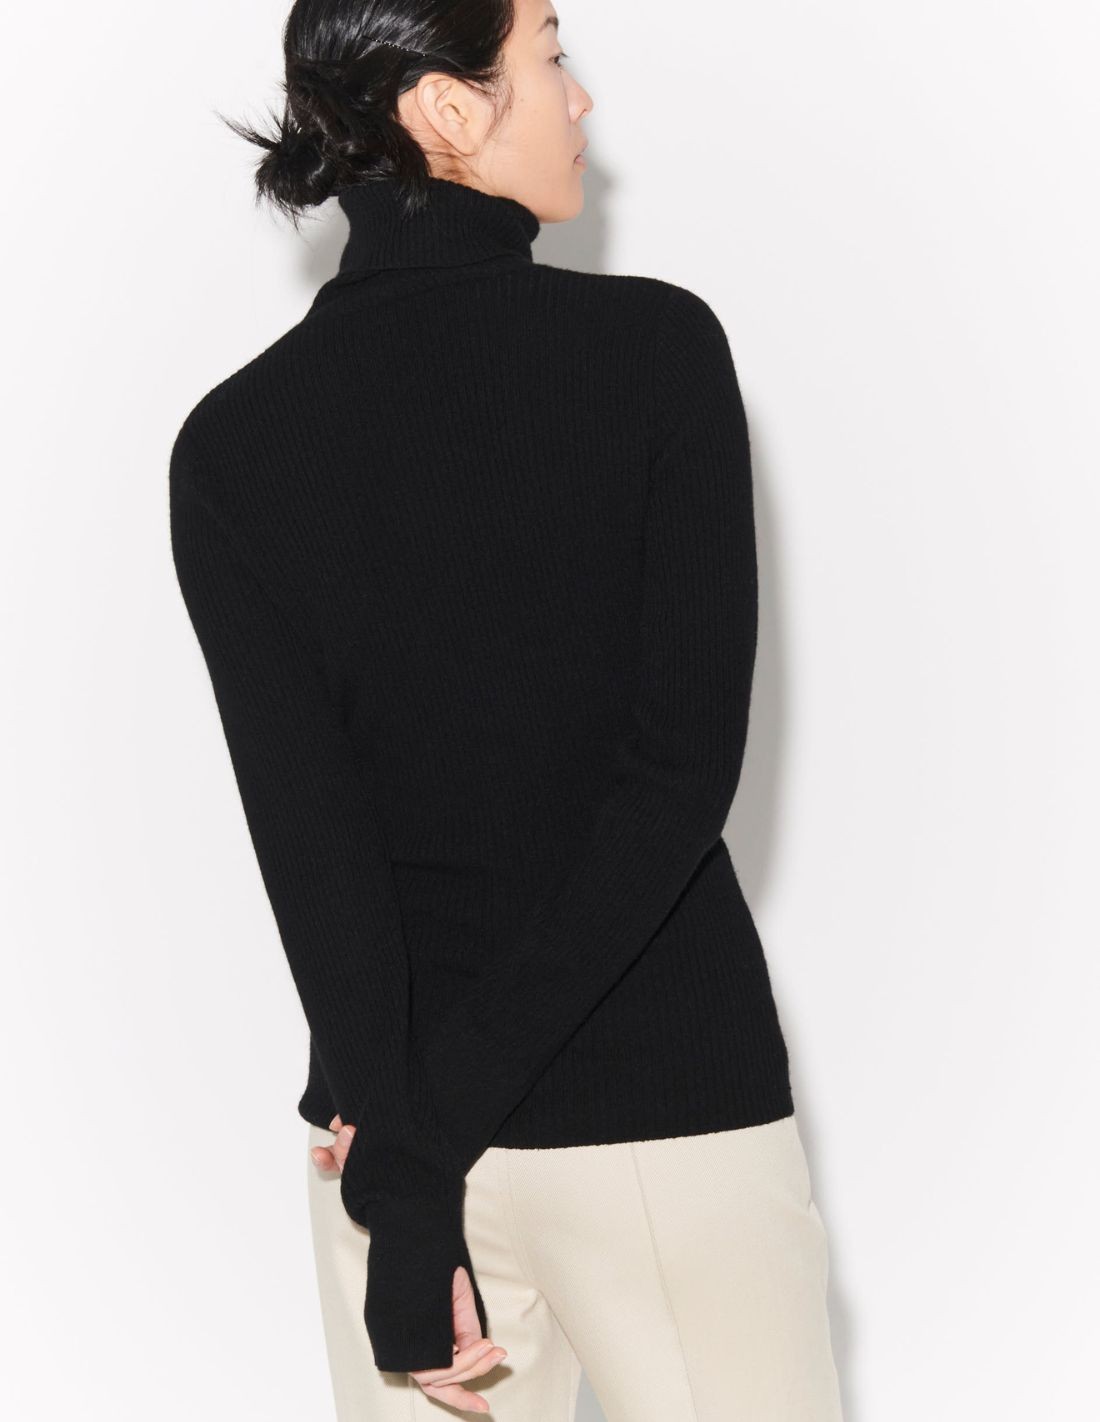 Black wool and cashmere rollneck sweater BARBARA BUI - FW22